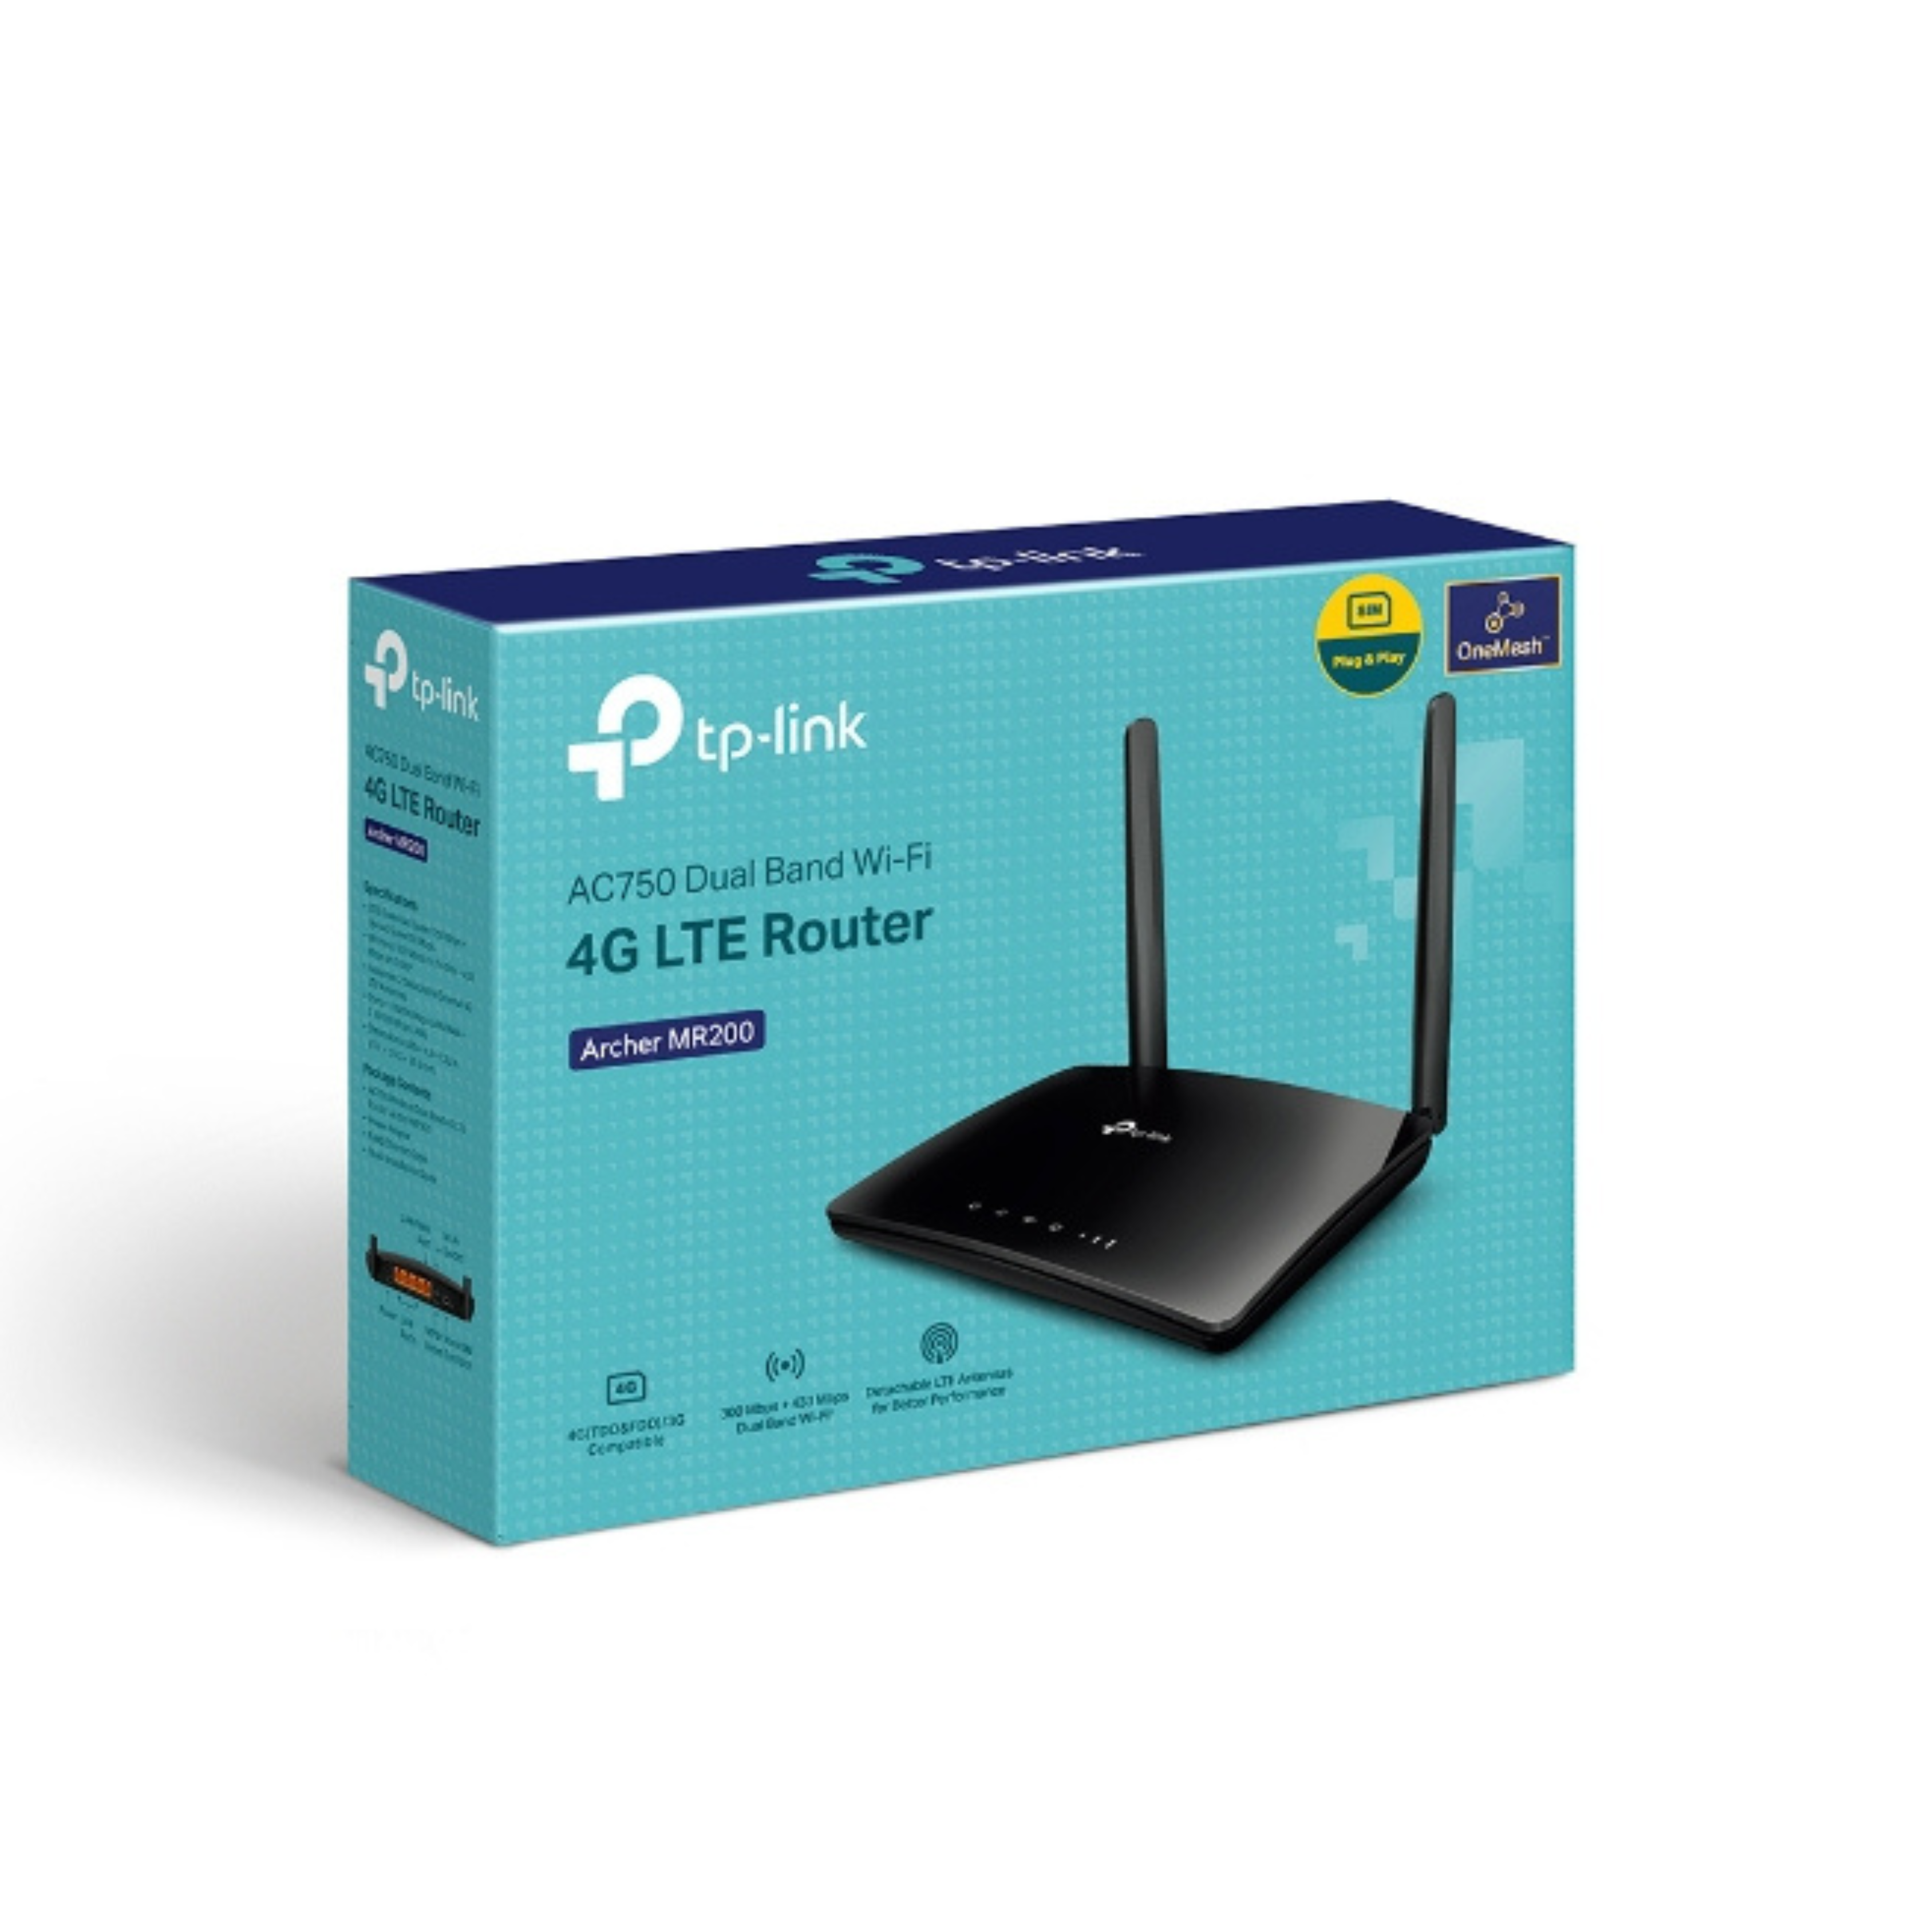 TP Link AC750 Dual Band WiFi 4G LTE Router